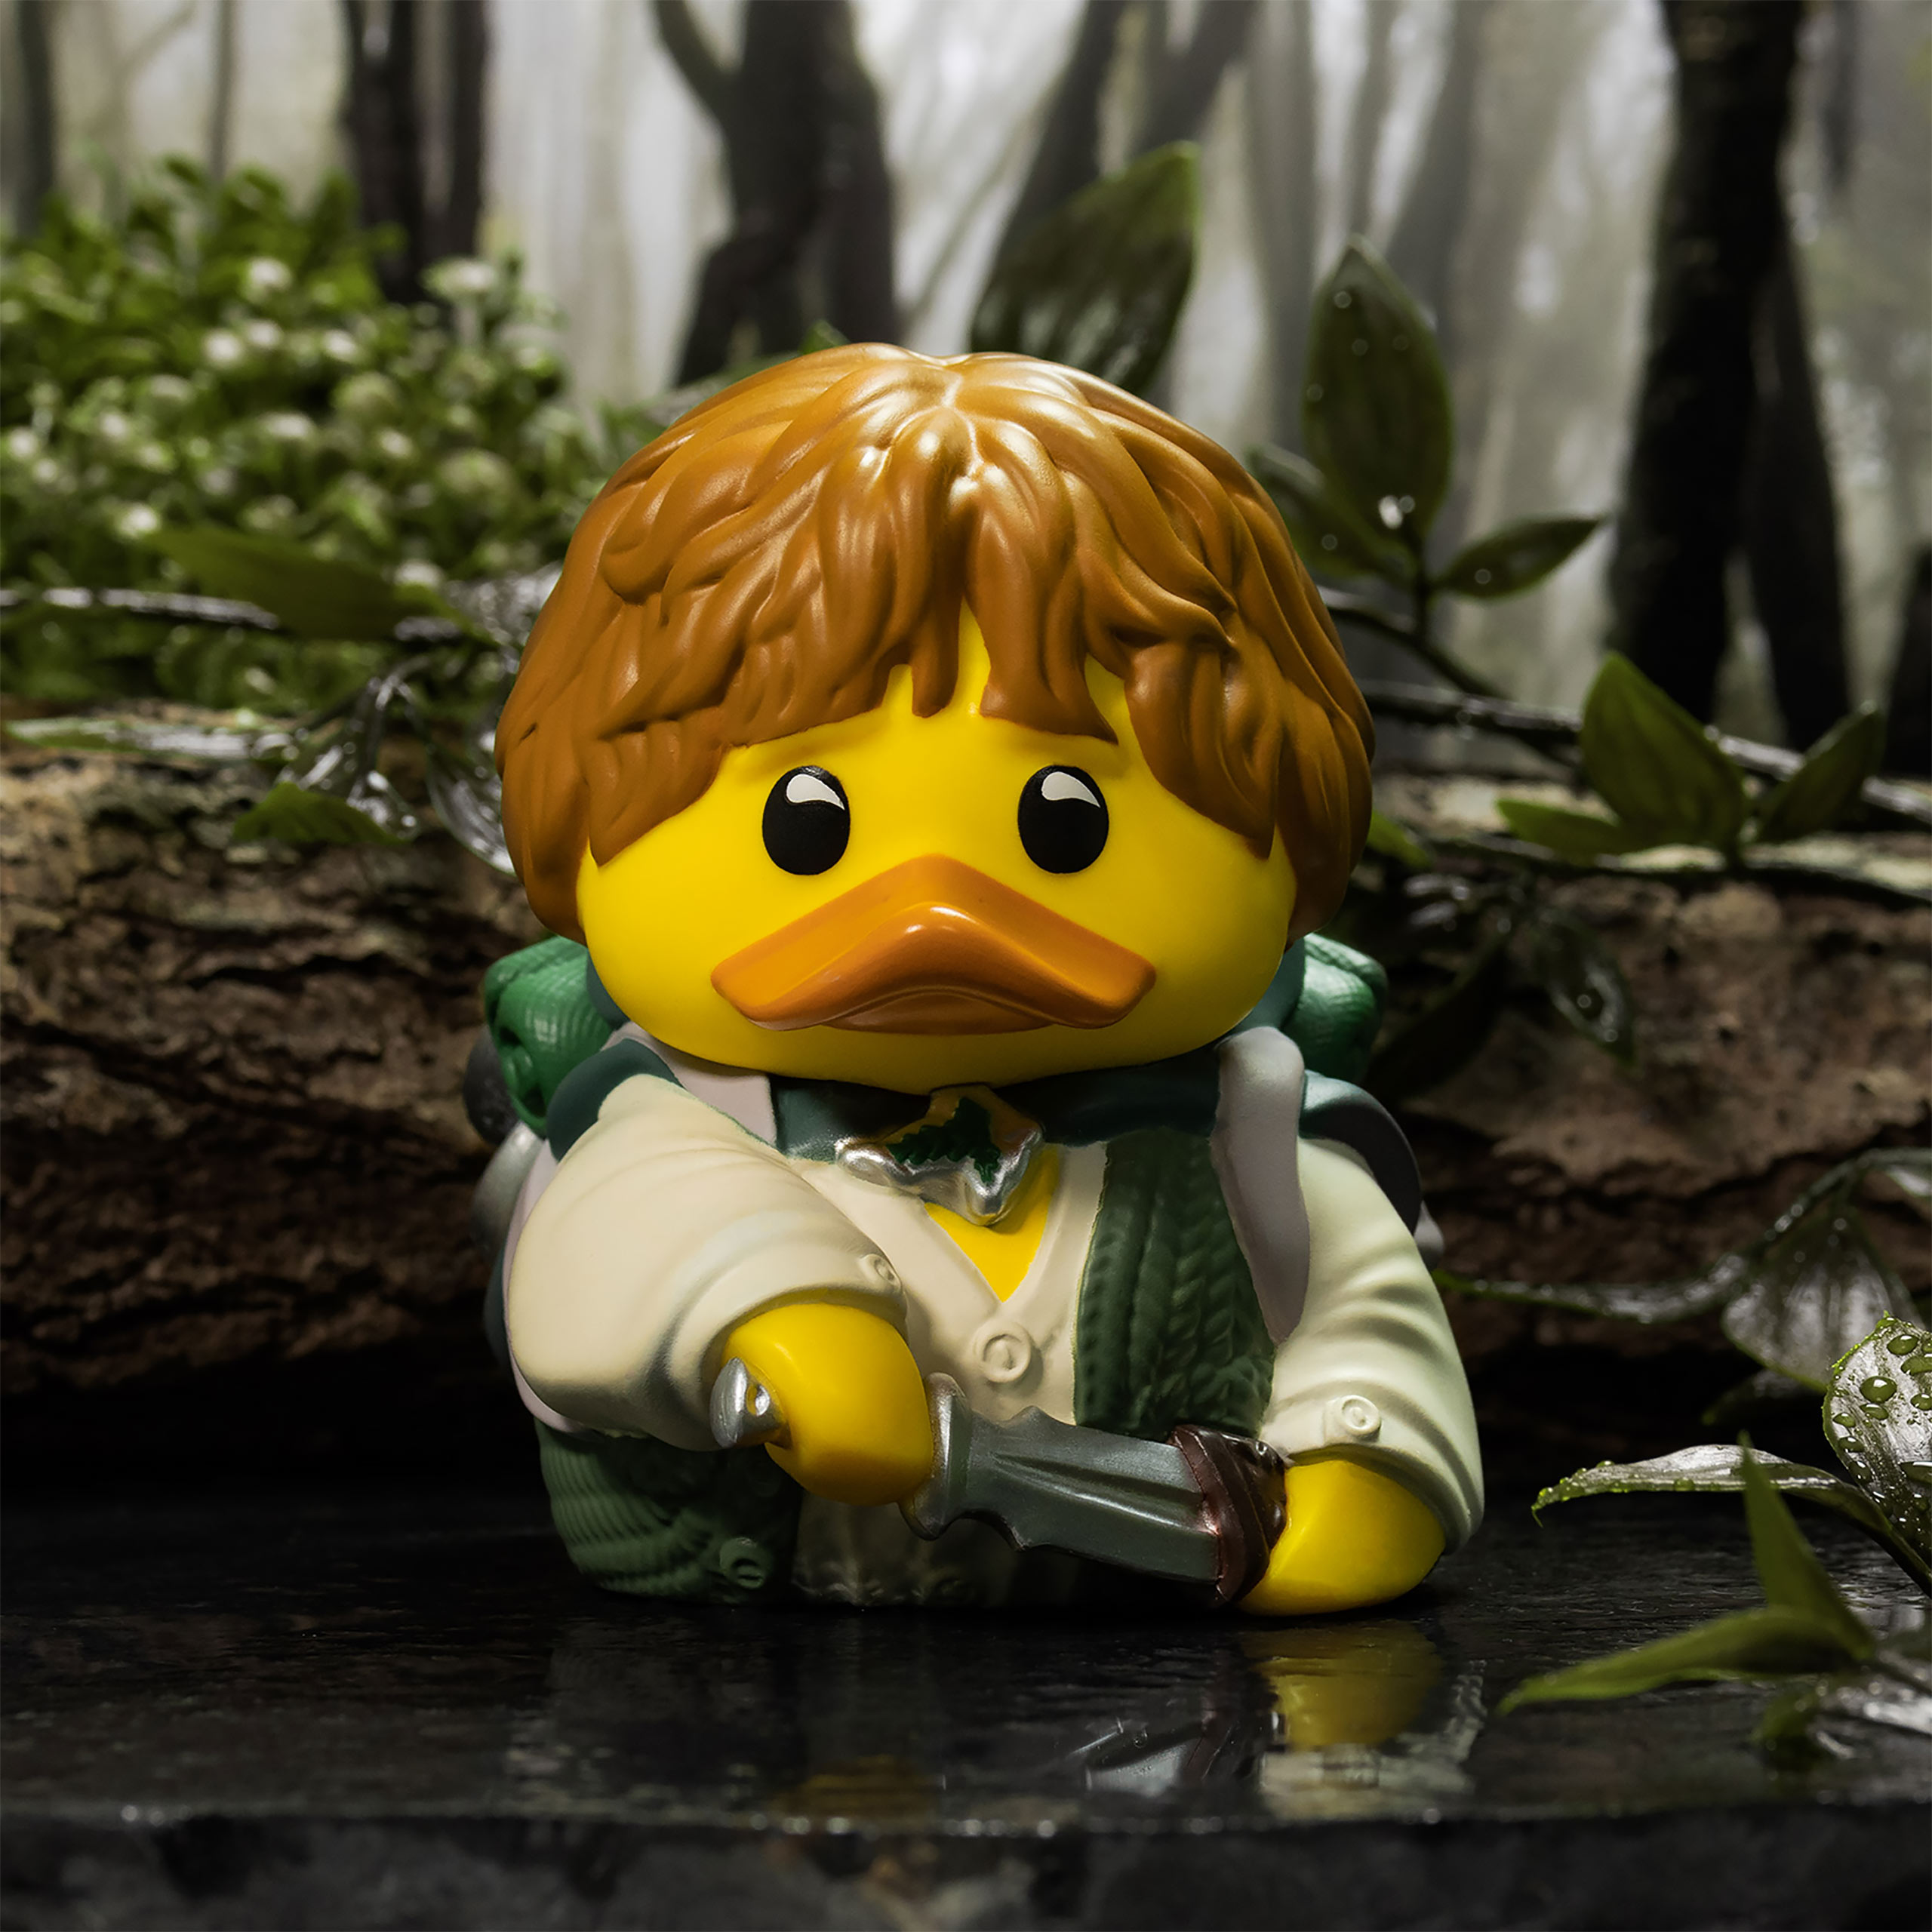 Lord of the Rings - Samwise Gamgee TUBBZ Decorative Duck